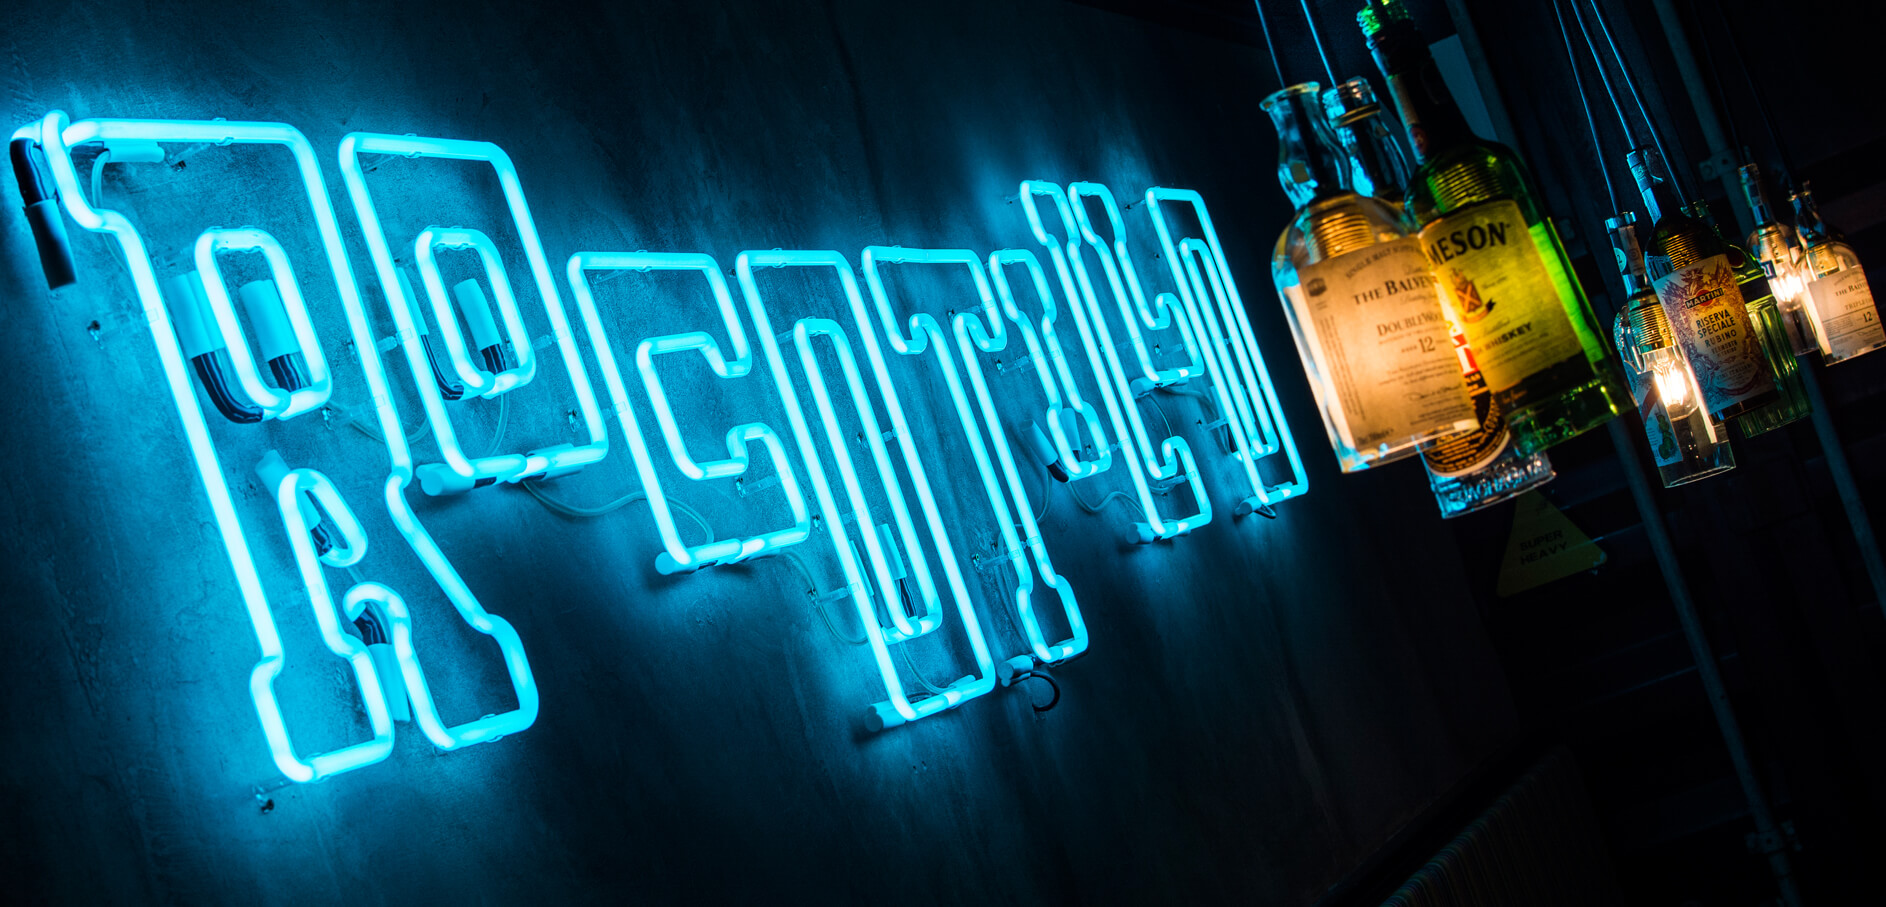 Rocotilli - neon-rocotillo-neon-on-the-wall-interior-restaurant-neon-mounted-to-the-wall-neon-over-tables-neon-sublimated-neon-on-the-concrete-wall-neon-glass-neon-logo-sign